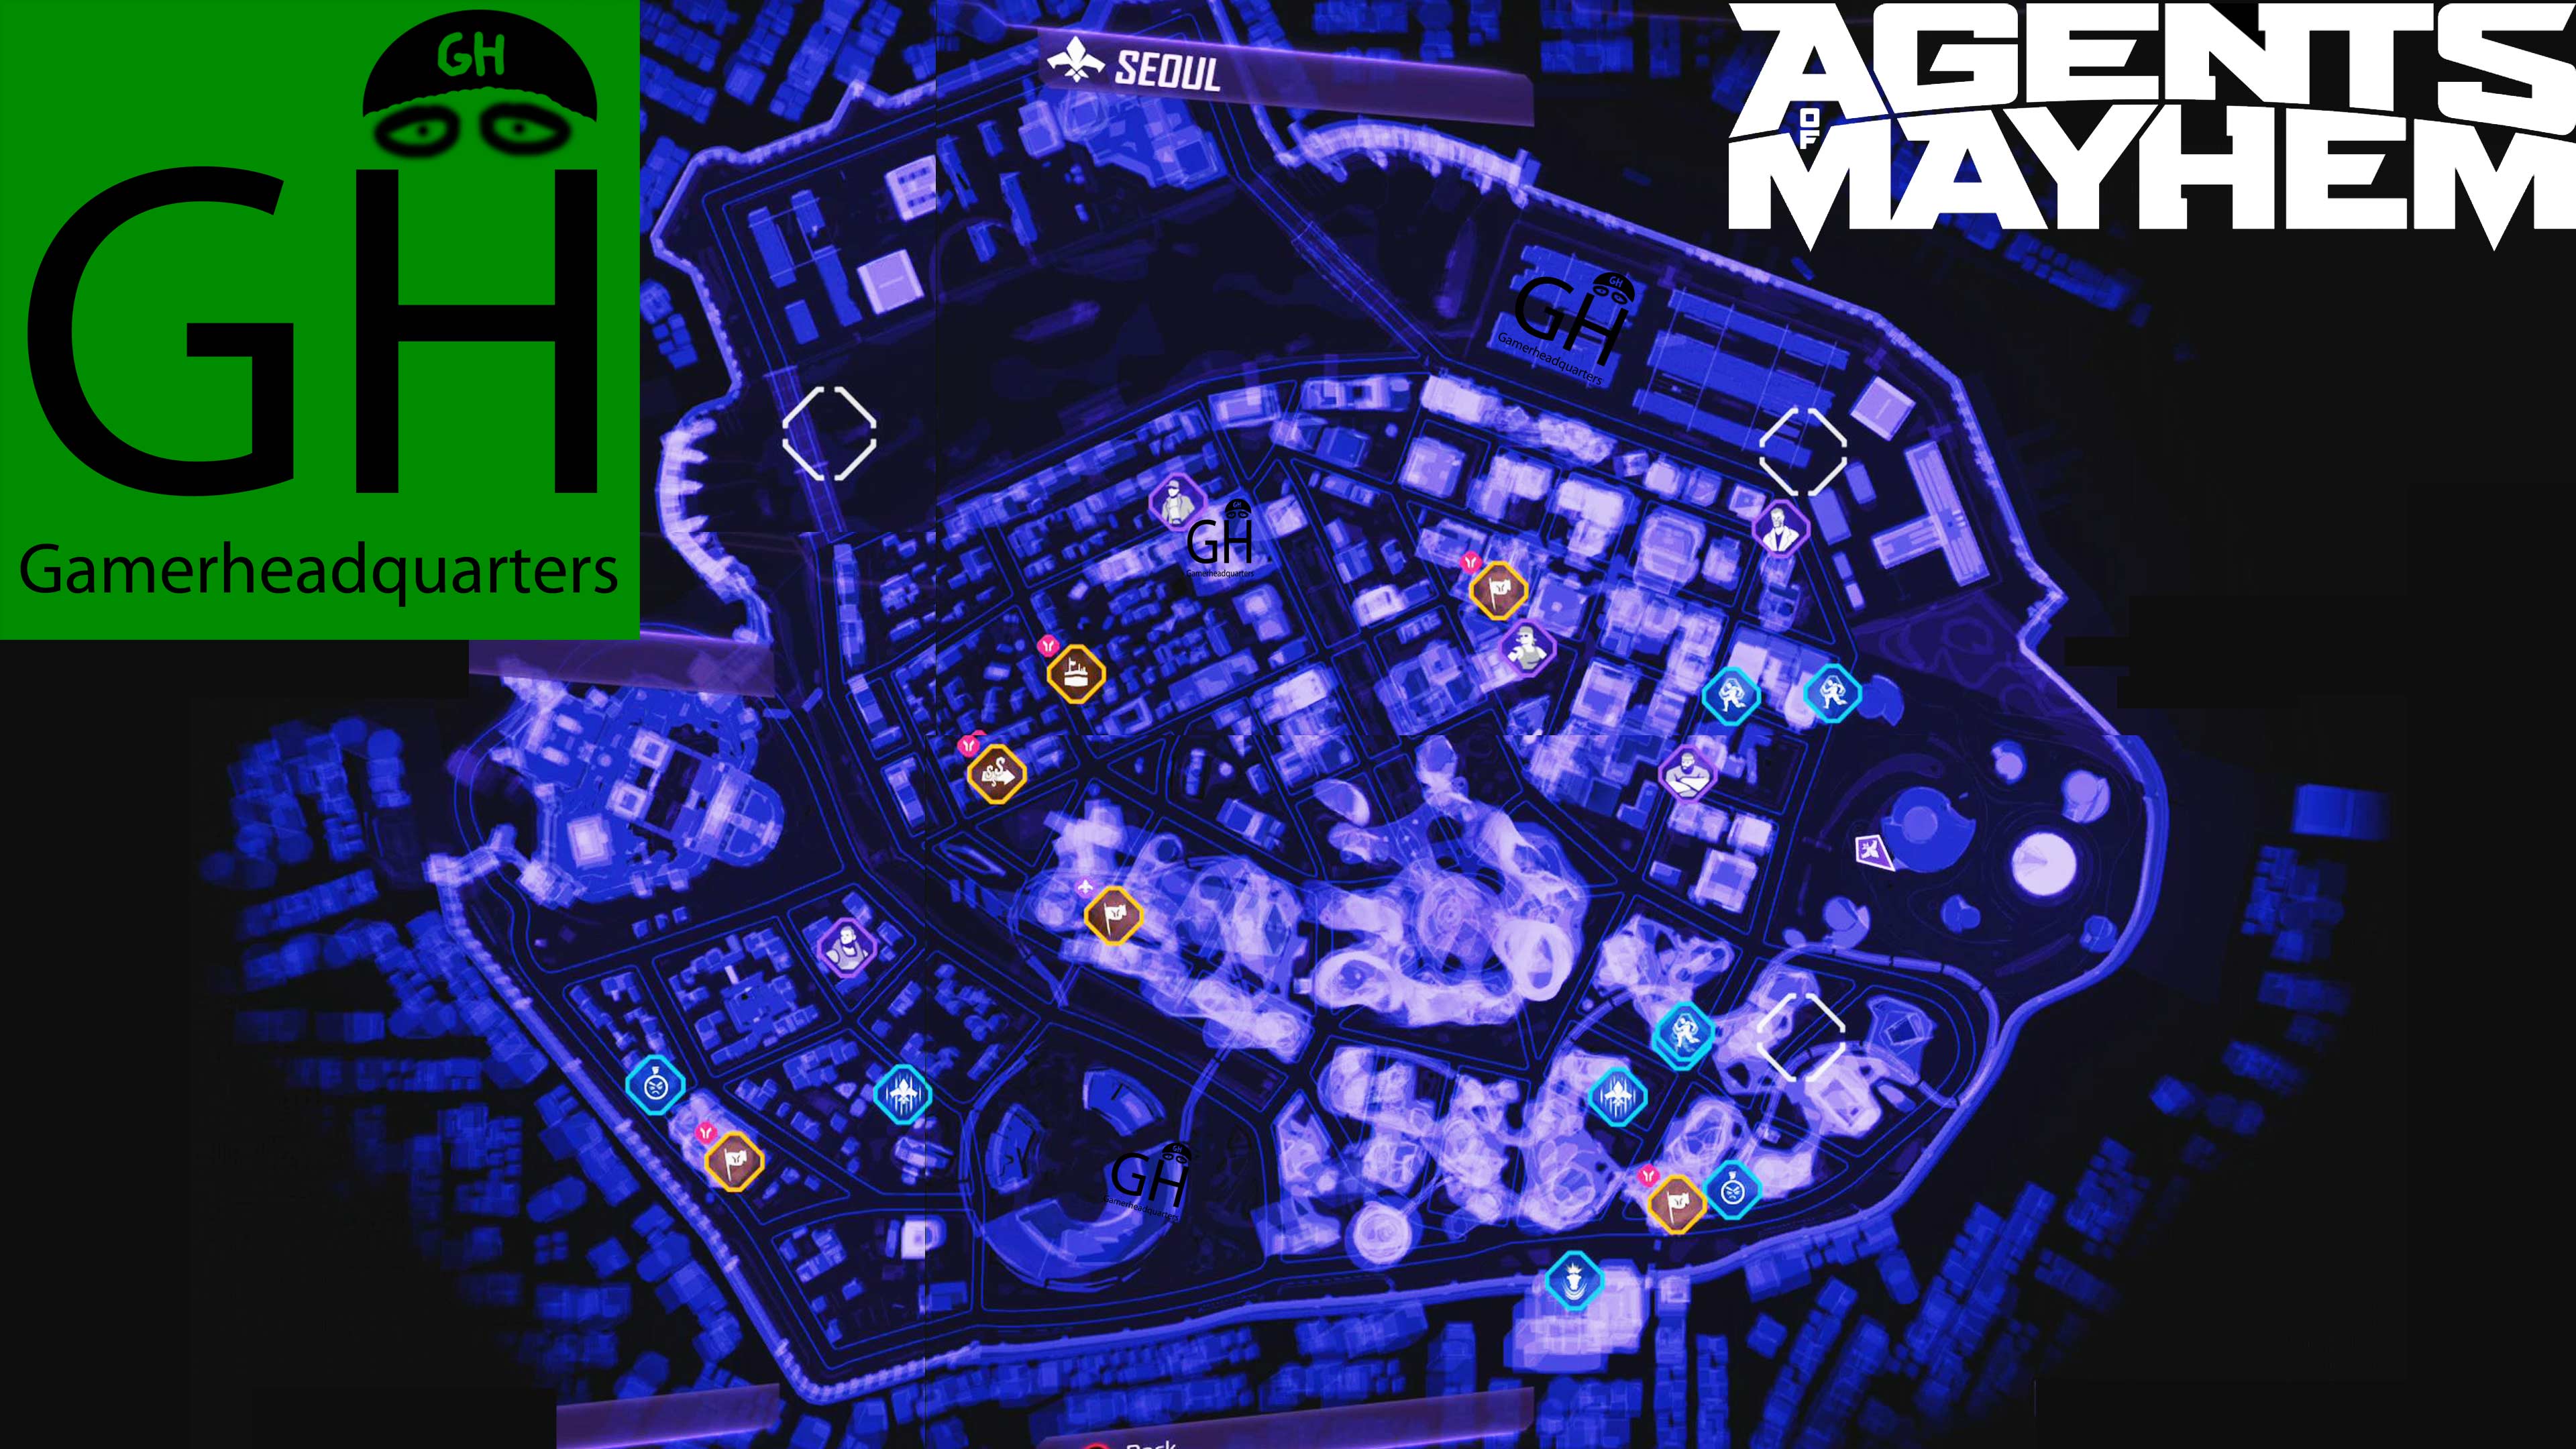 Agents of Mayhem map featuring the view of the entire area of Seoul